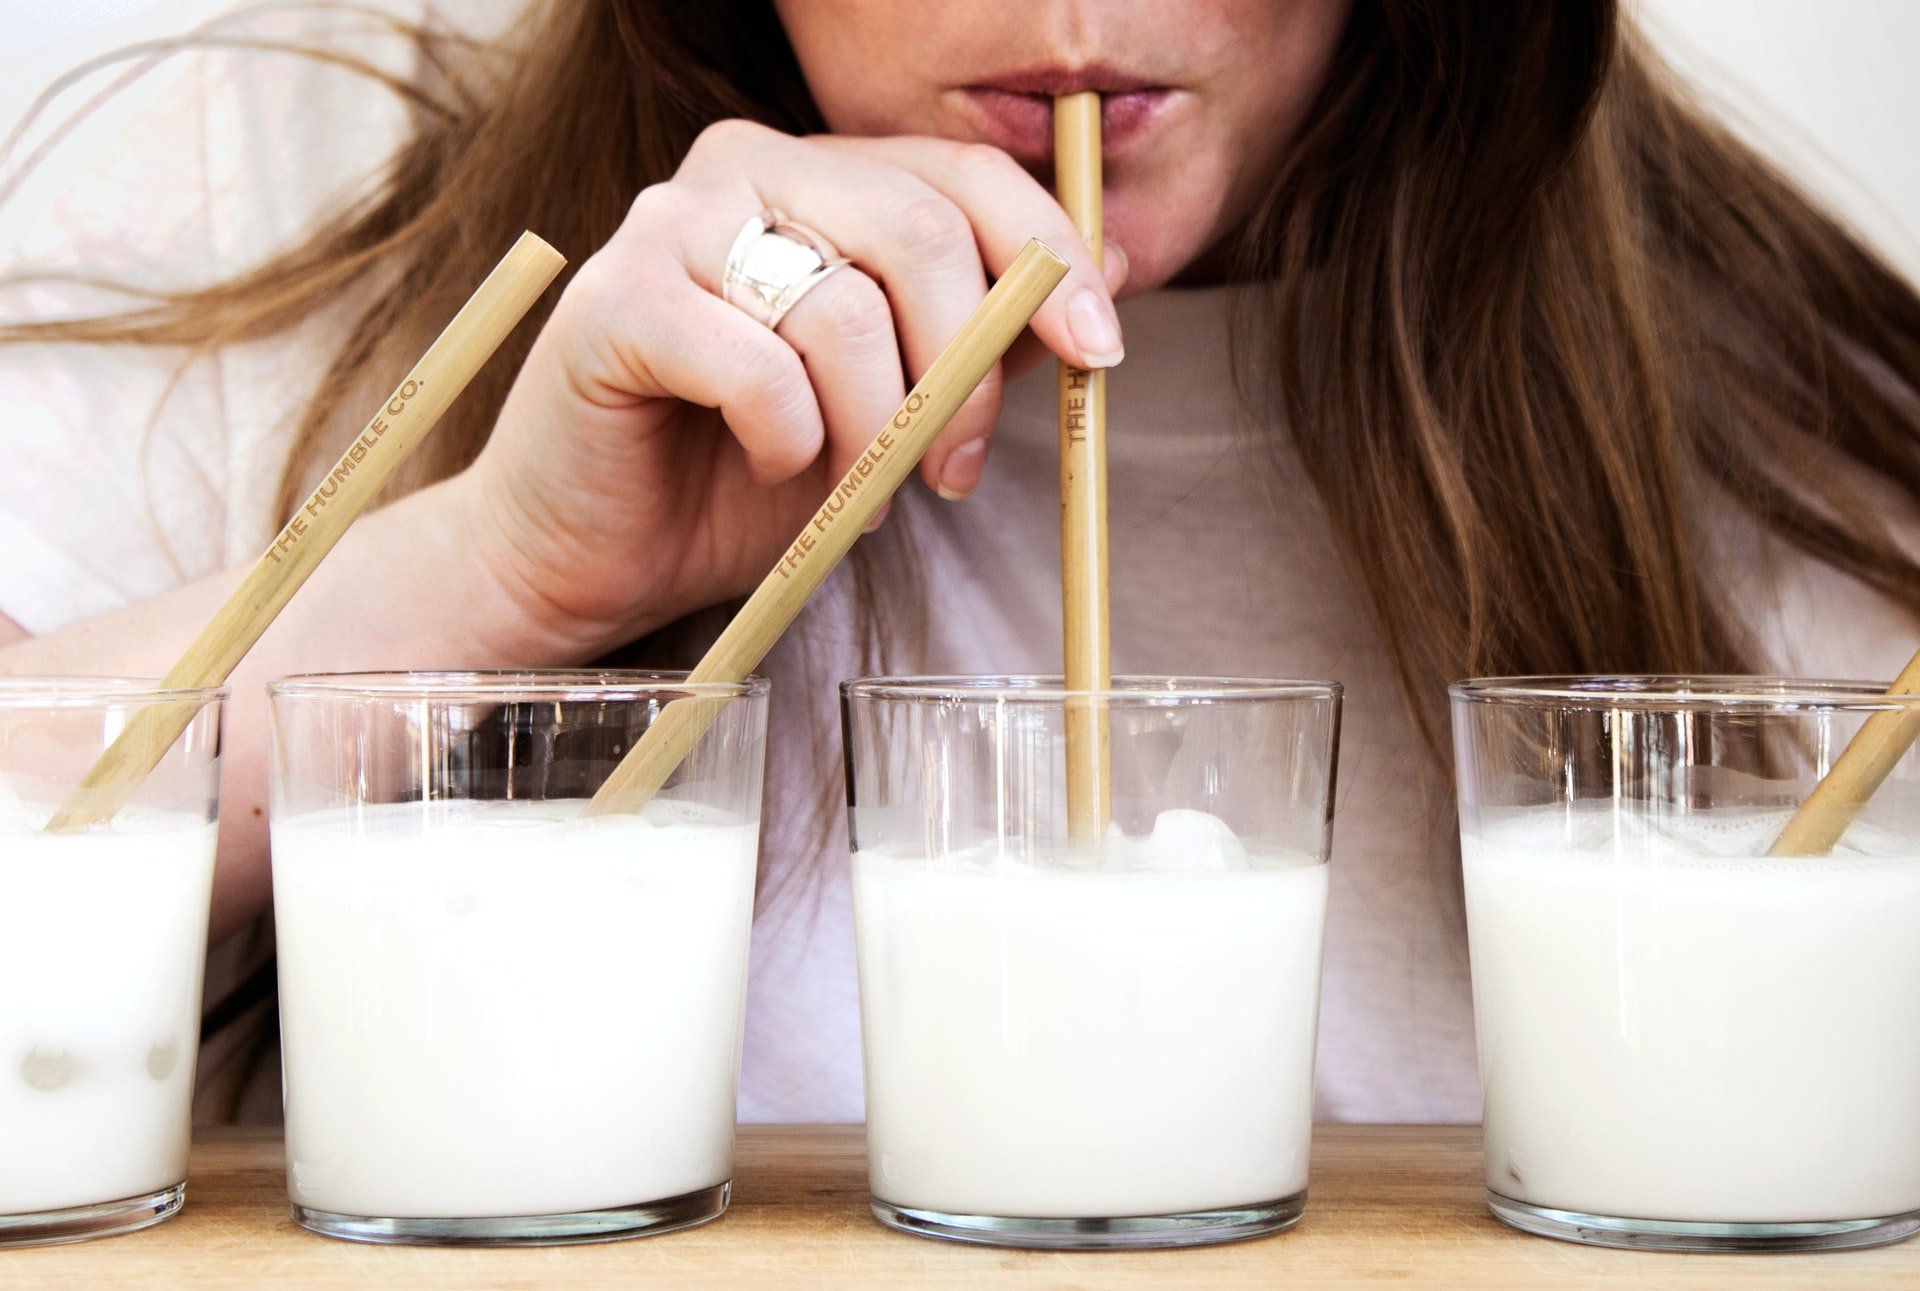 How Healthy Is Manufactured Plant-Based Milk Really?